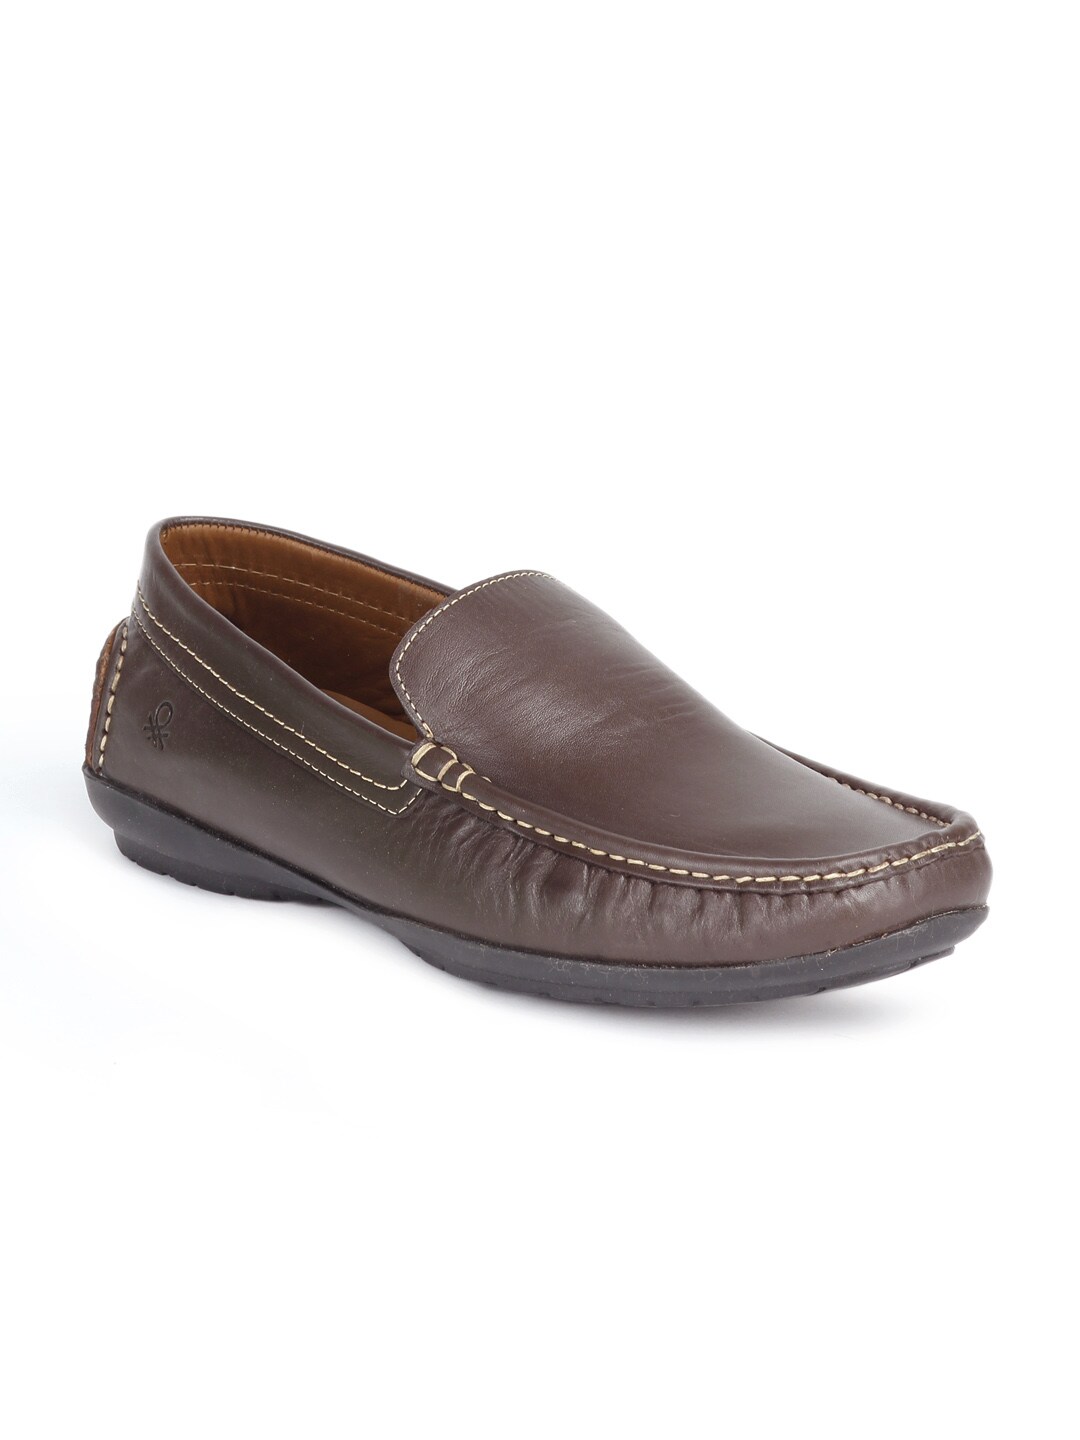 United Colors of Benetton Men Brown Shoes